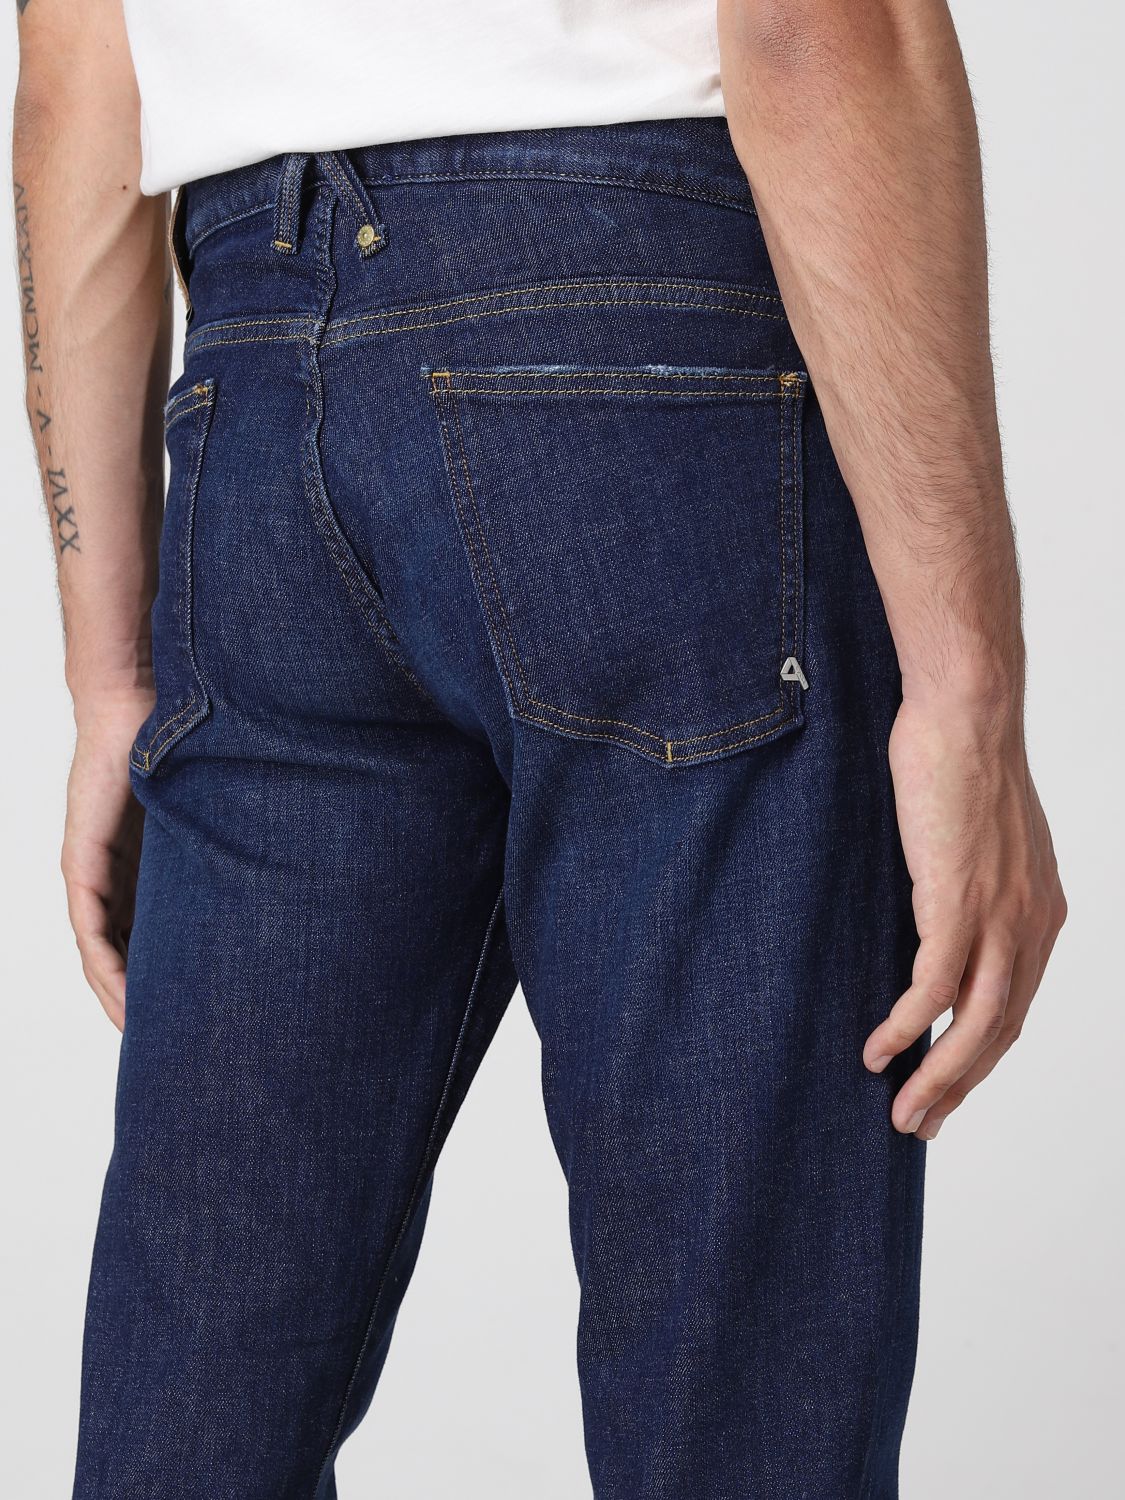 CYCLE: Jeans men - Blue | Jeans Cycle 321P515 D039 GIGLIO.COM